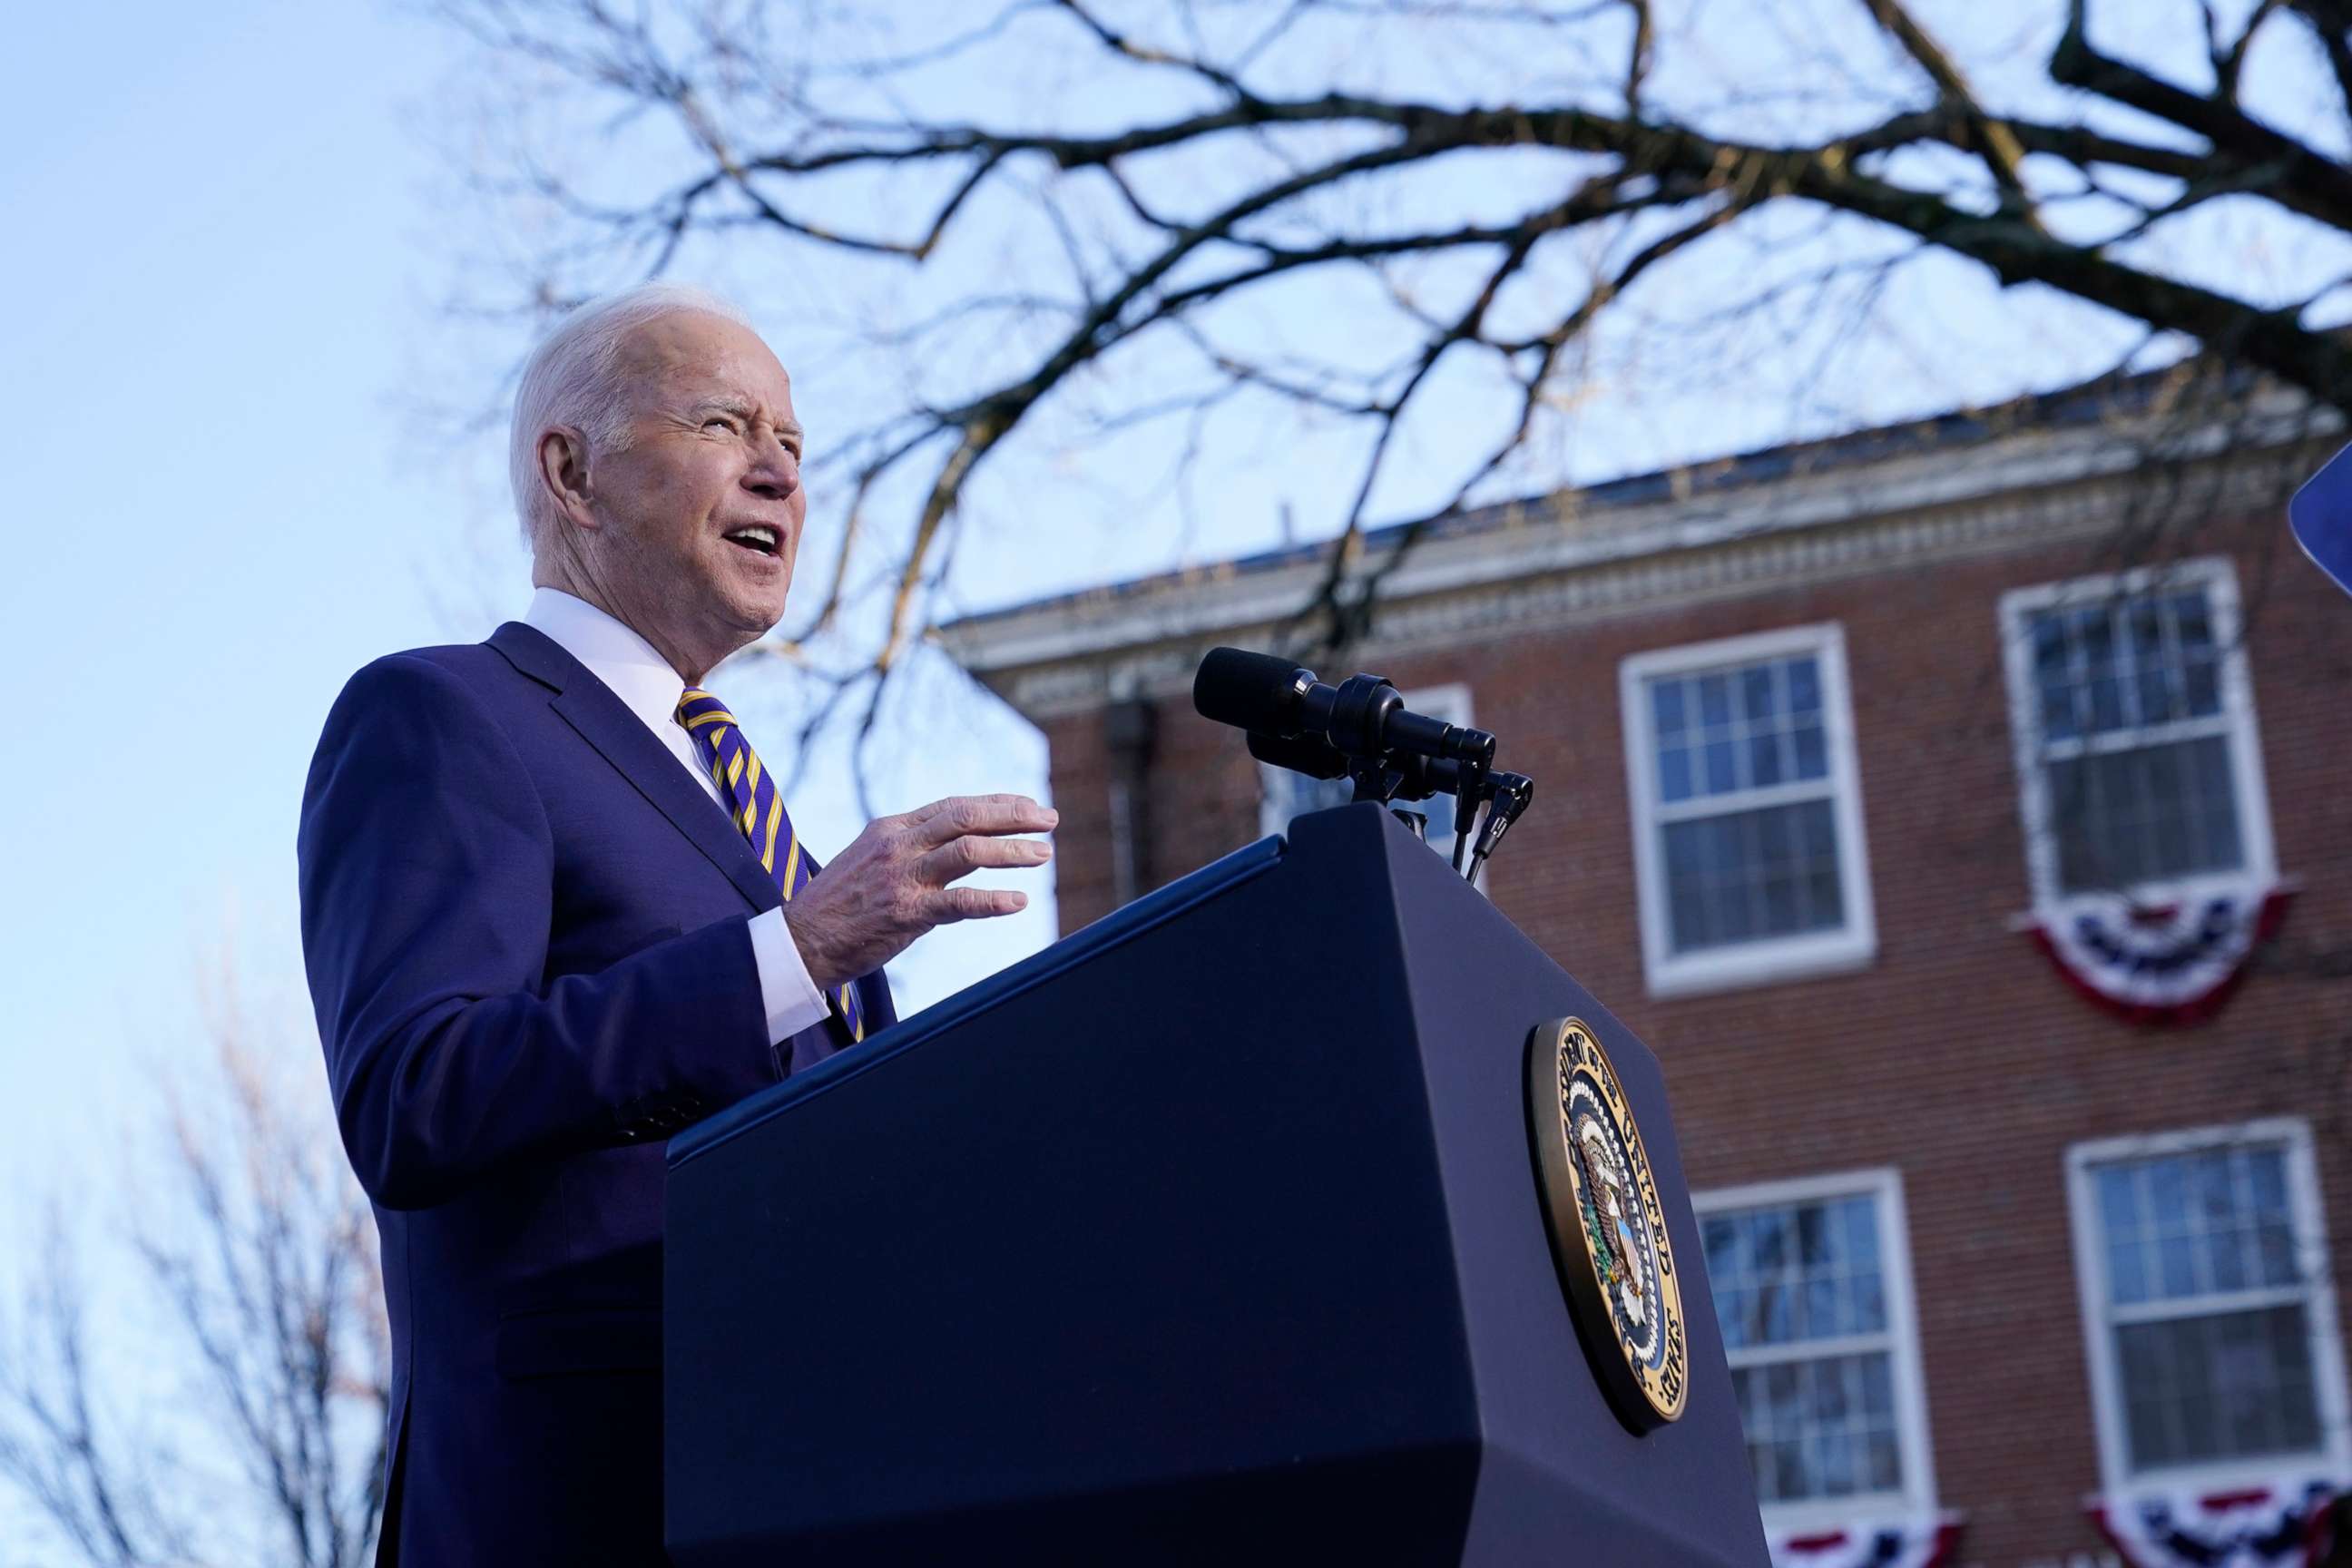 PHOTO: President Joe Biden speaks in support of changing the Senate filibuster rules that have stalled voting rights legislation, at Atlanta University Center Consortium, on the grounds of Morehouse College and Clark Atlanta University, Jan. 11, 2022.